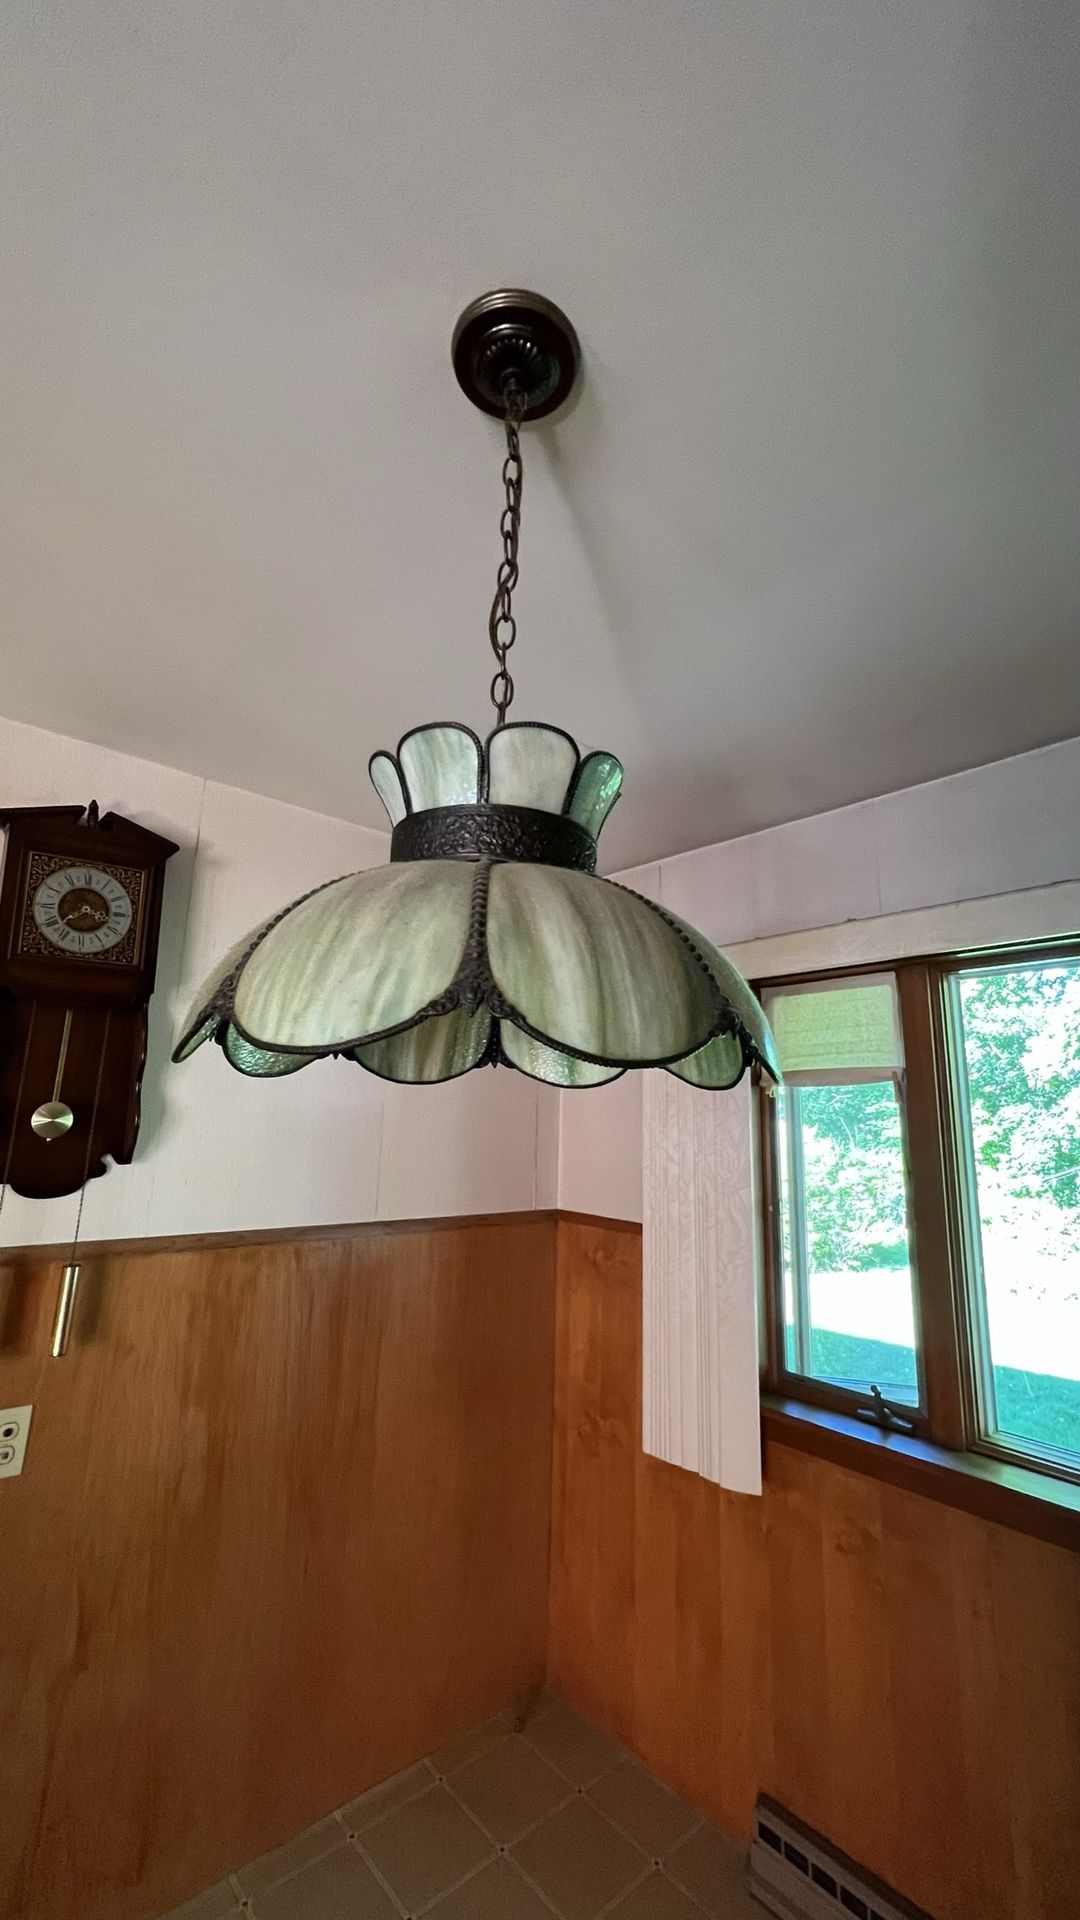 Vintage Light Fixtures - Stained Glass & Metal